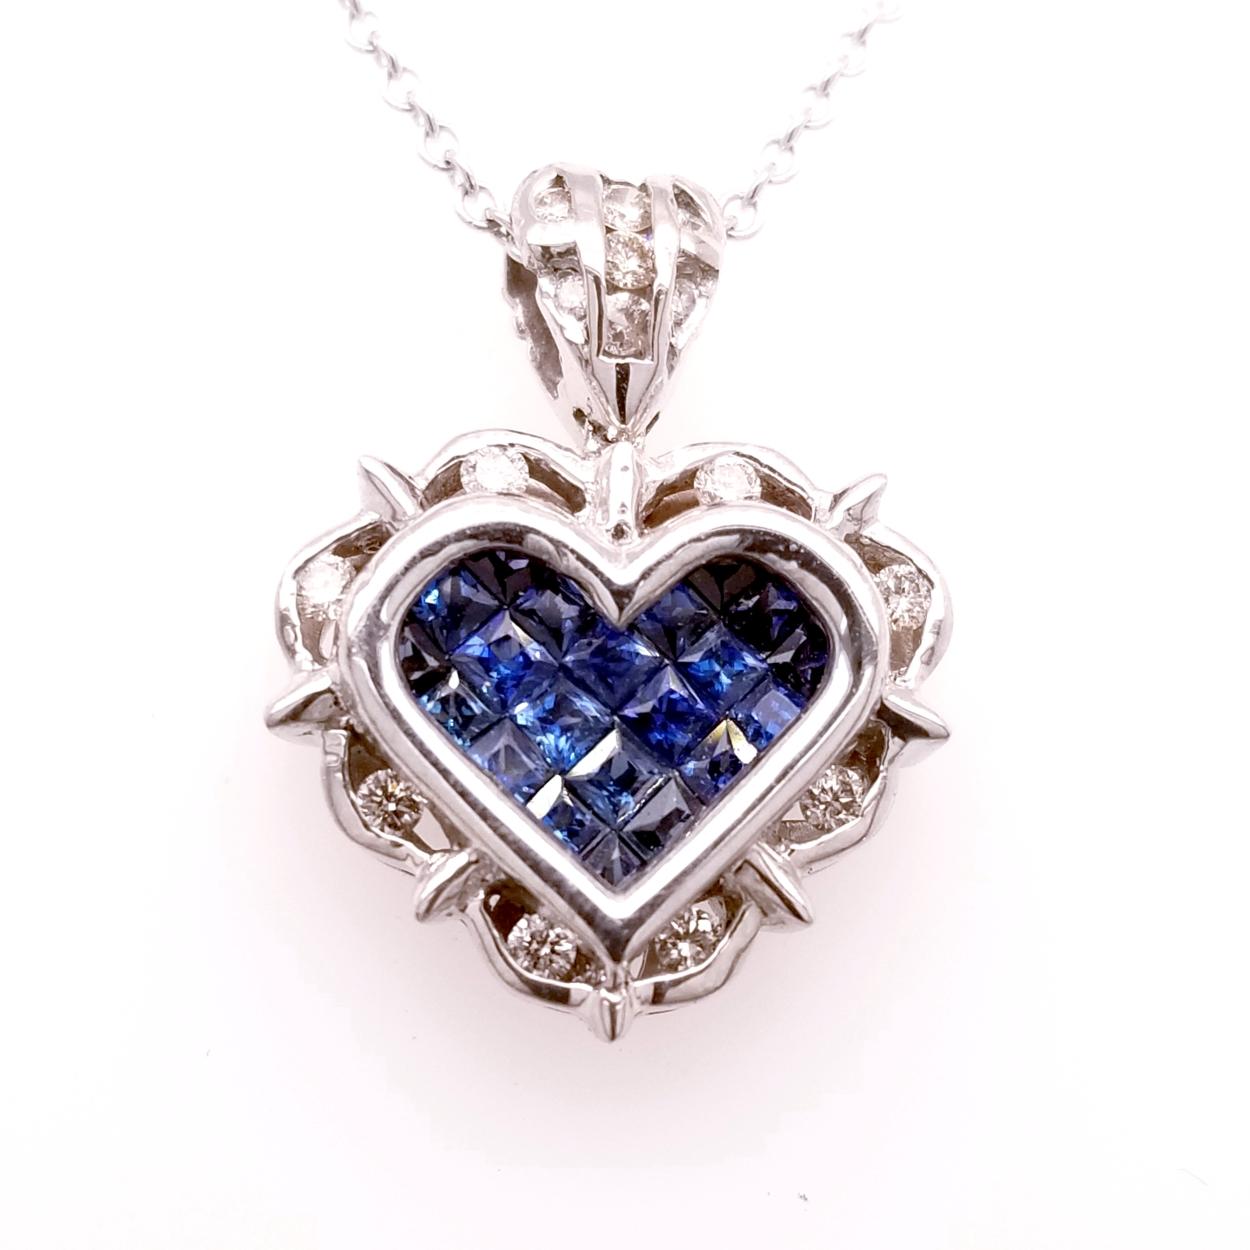 18K Gold Heart shaped Pendant with 21 Invisible Set Princess Cut Blue Sapphires (Total Gem Weight 0.80 Ct) surrounded by a Channel set Halo of diamonds and diamond set Bale with total weight of 0.18 Ct. 
Total Diamond Weight: 0.18 Ct
Total Gem